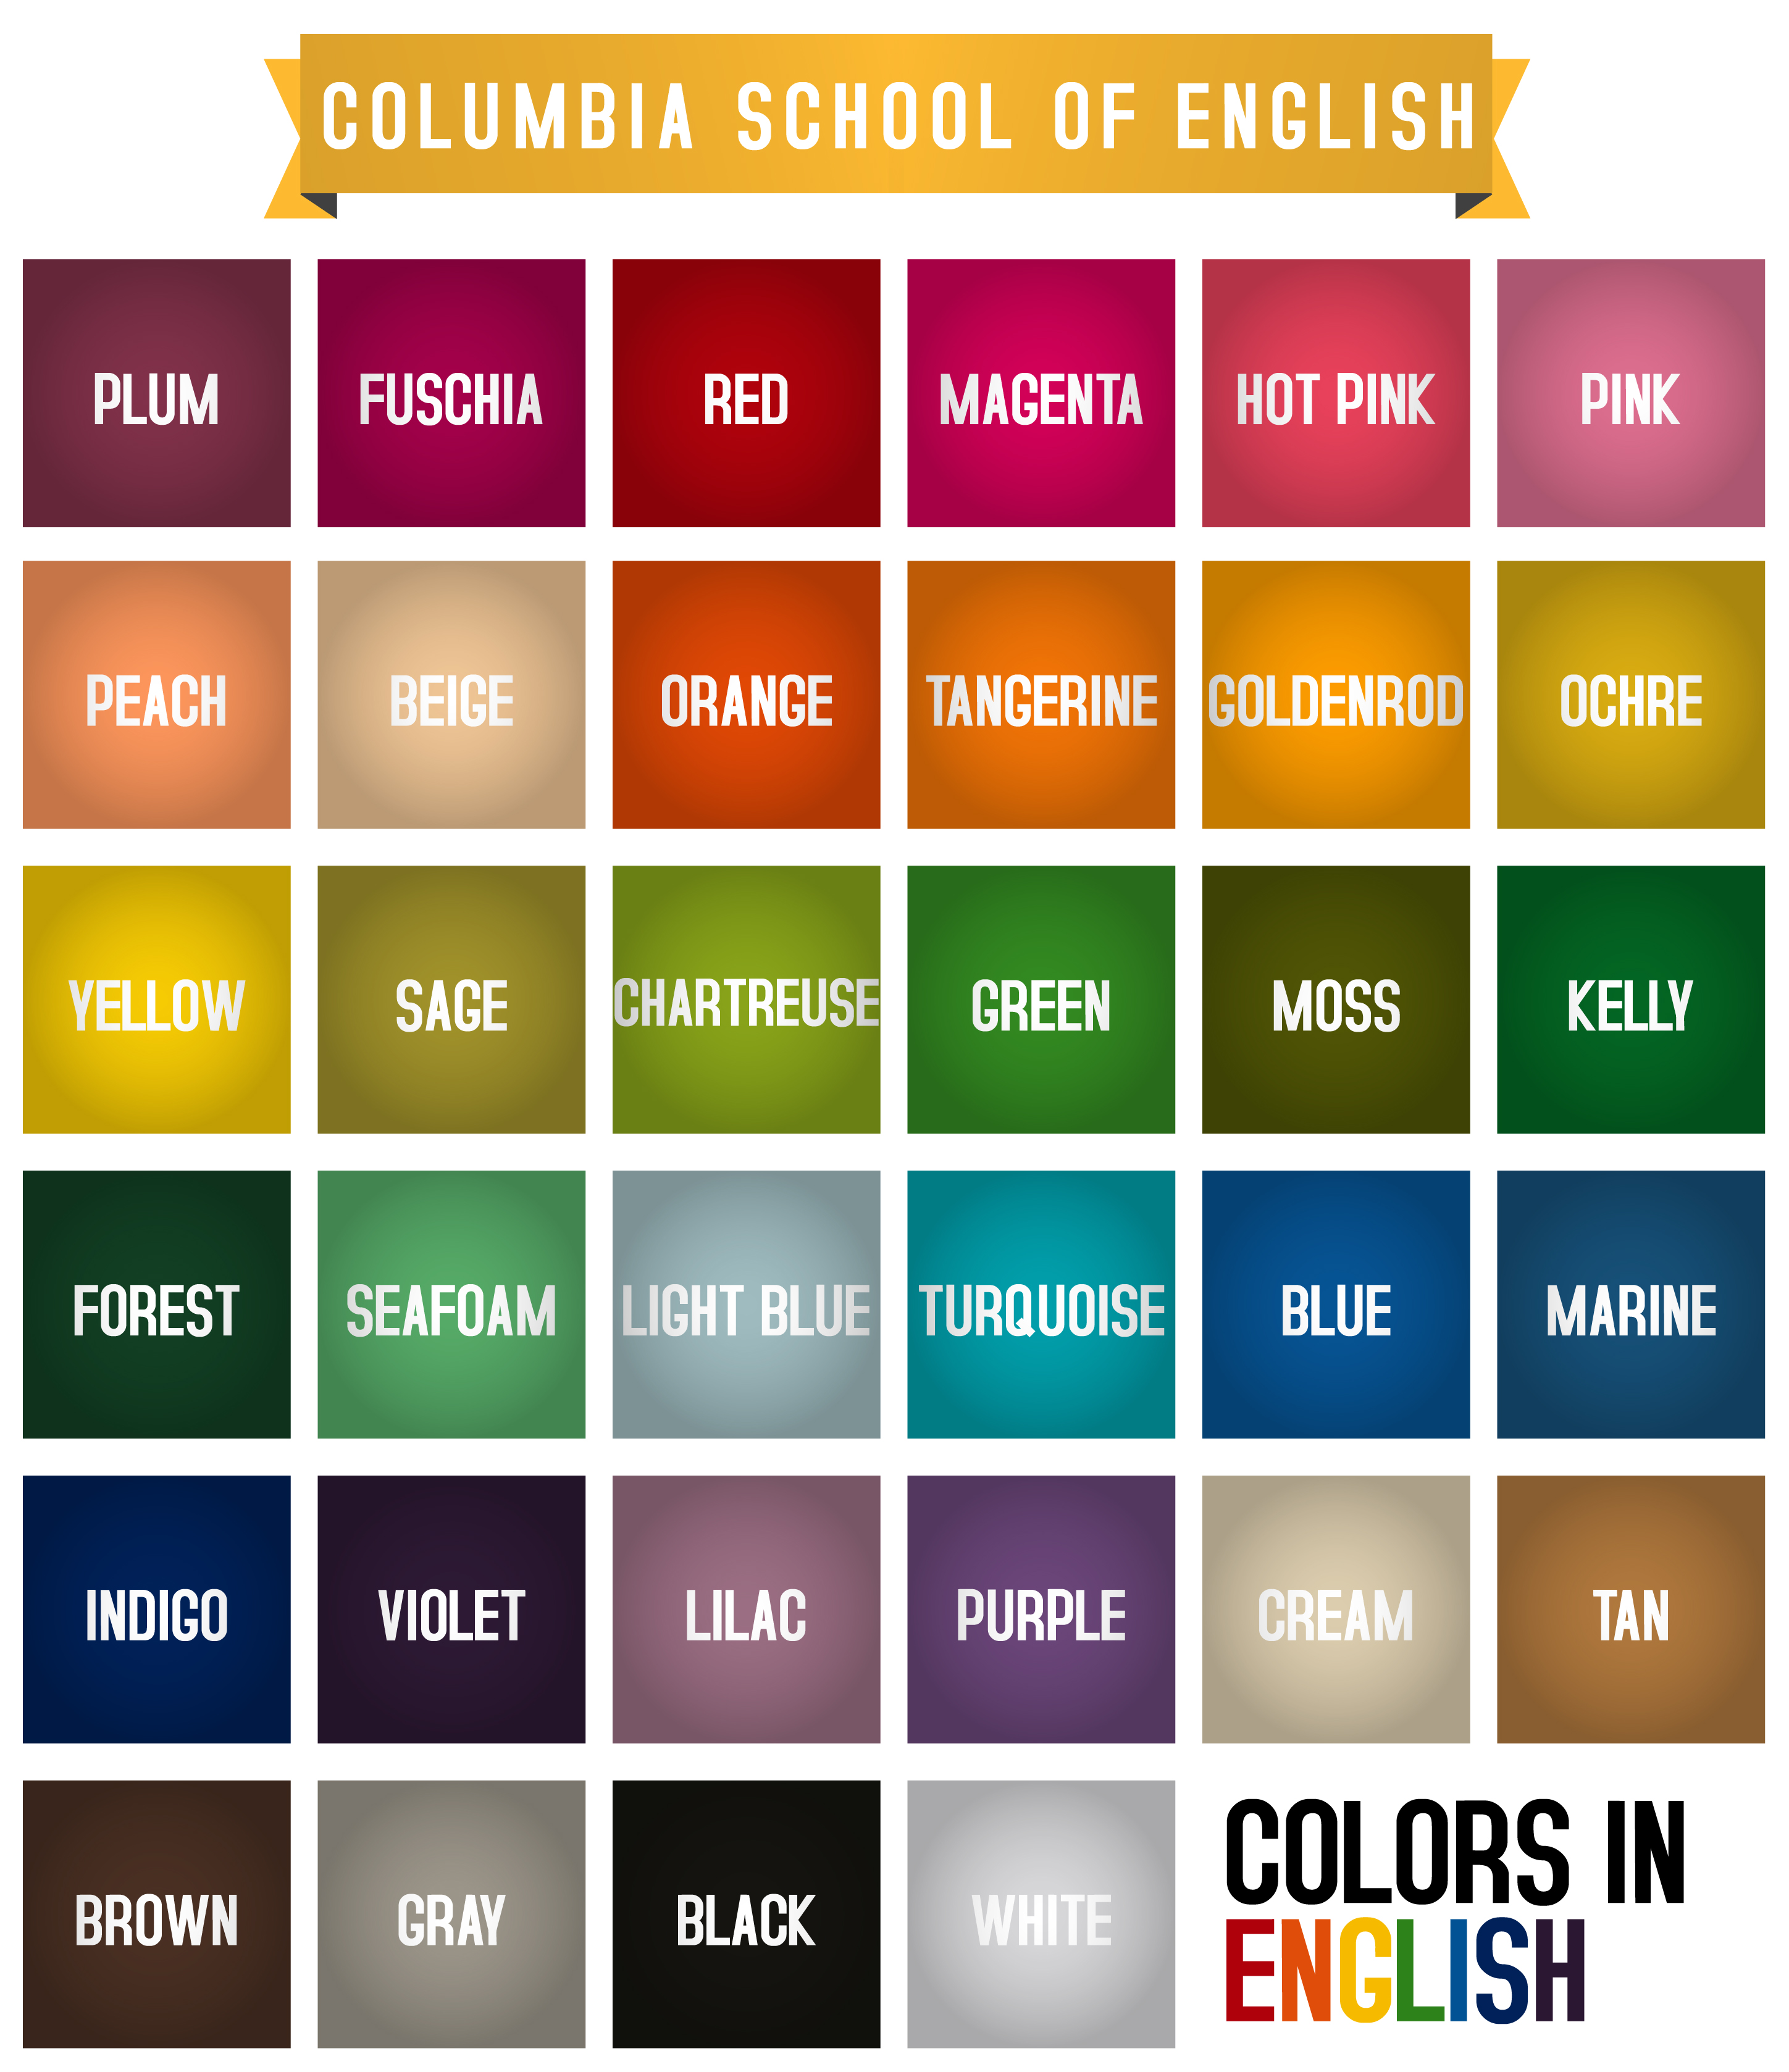 CORES EM INGLÊS - COLORS IN ENGLISH 